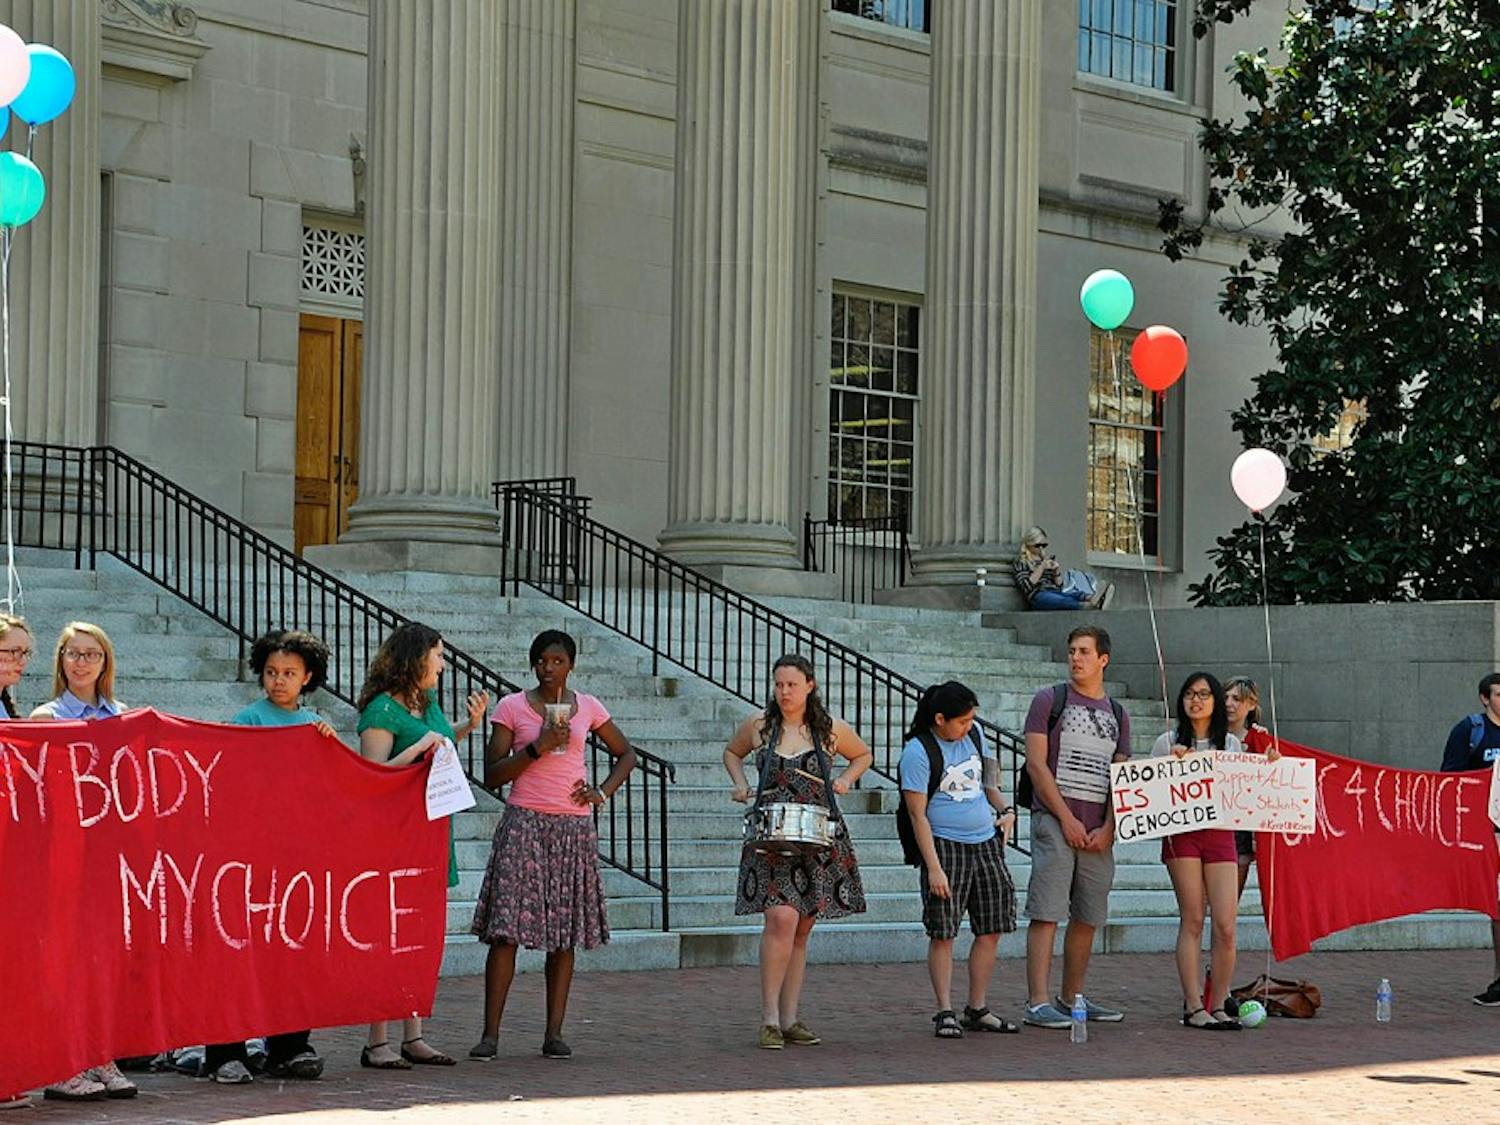 Students from different organizations gathered in front of Wilson Library to form a human chain and to protest the anti-abortion displays.